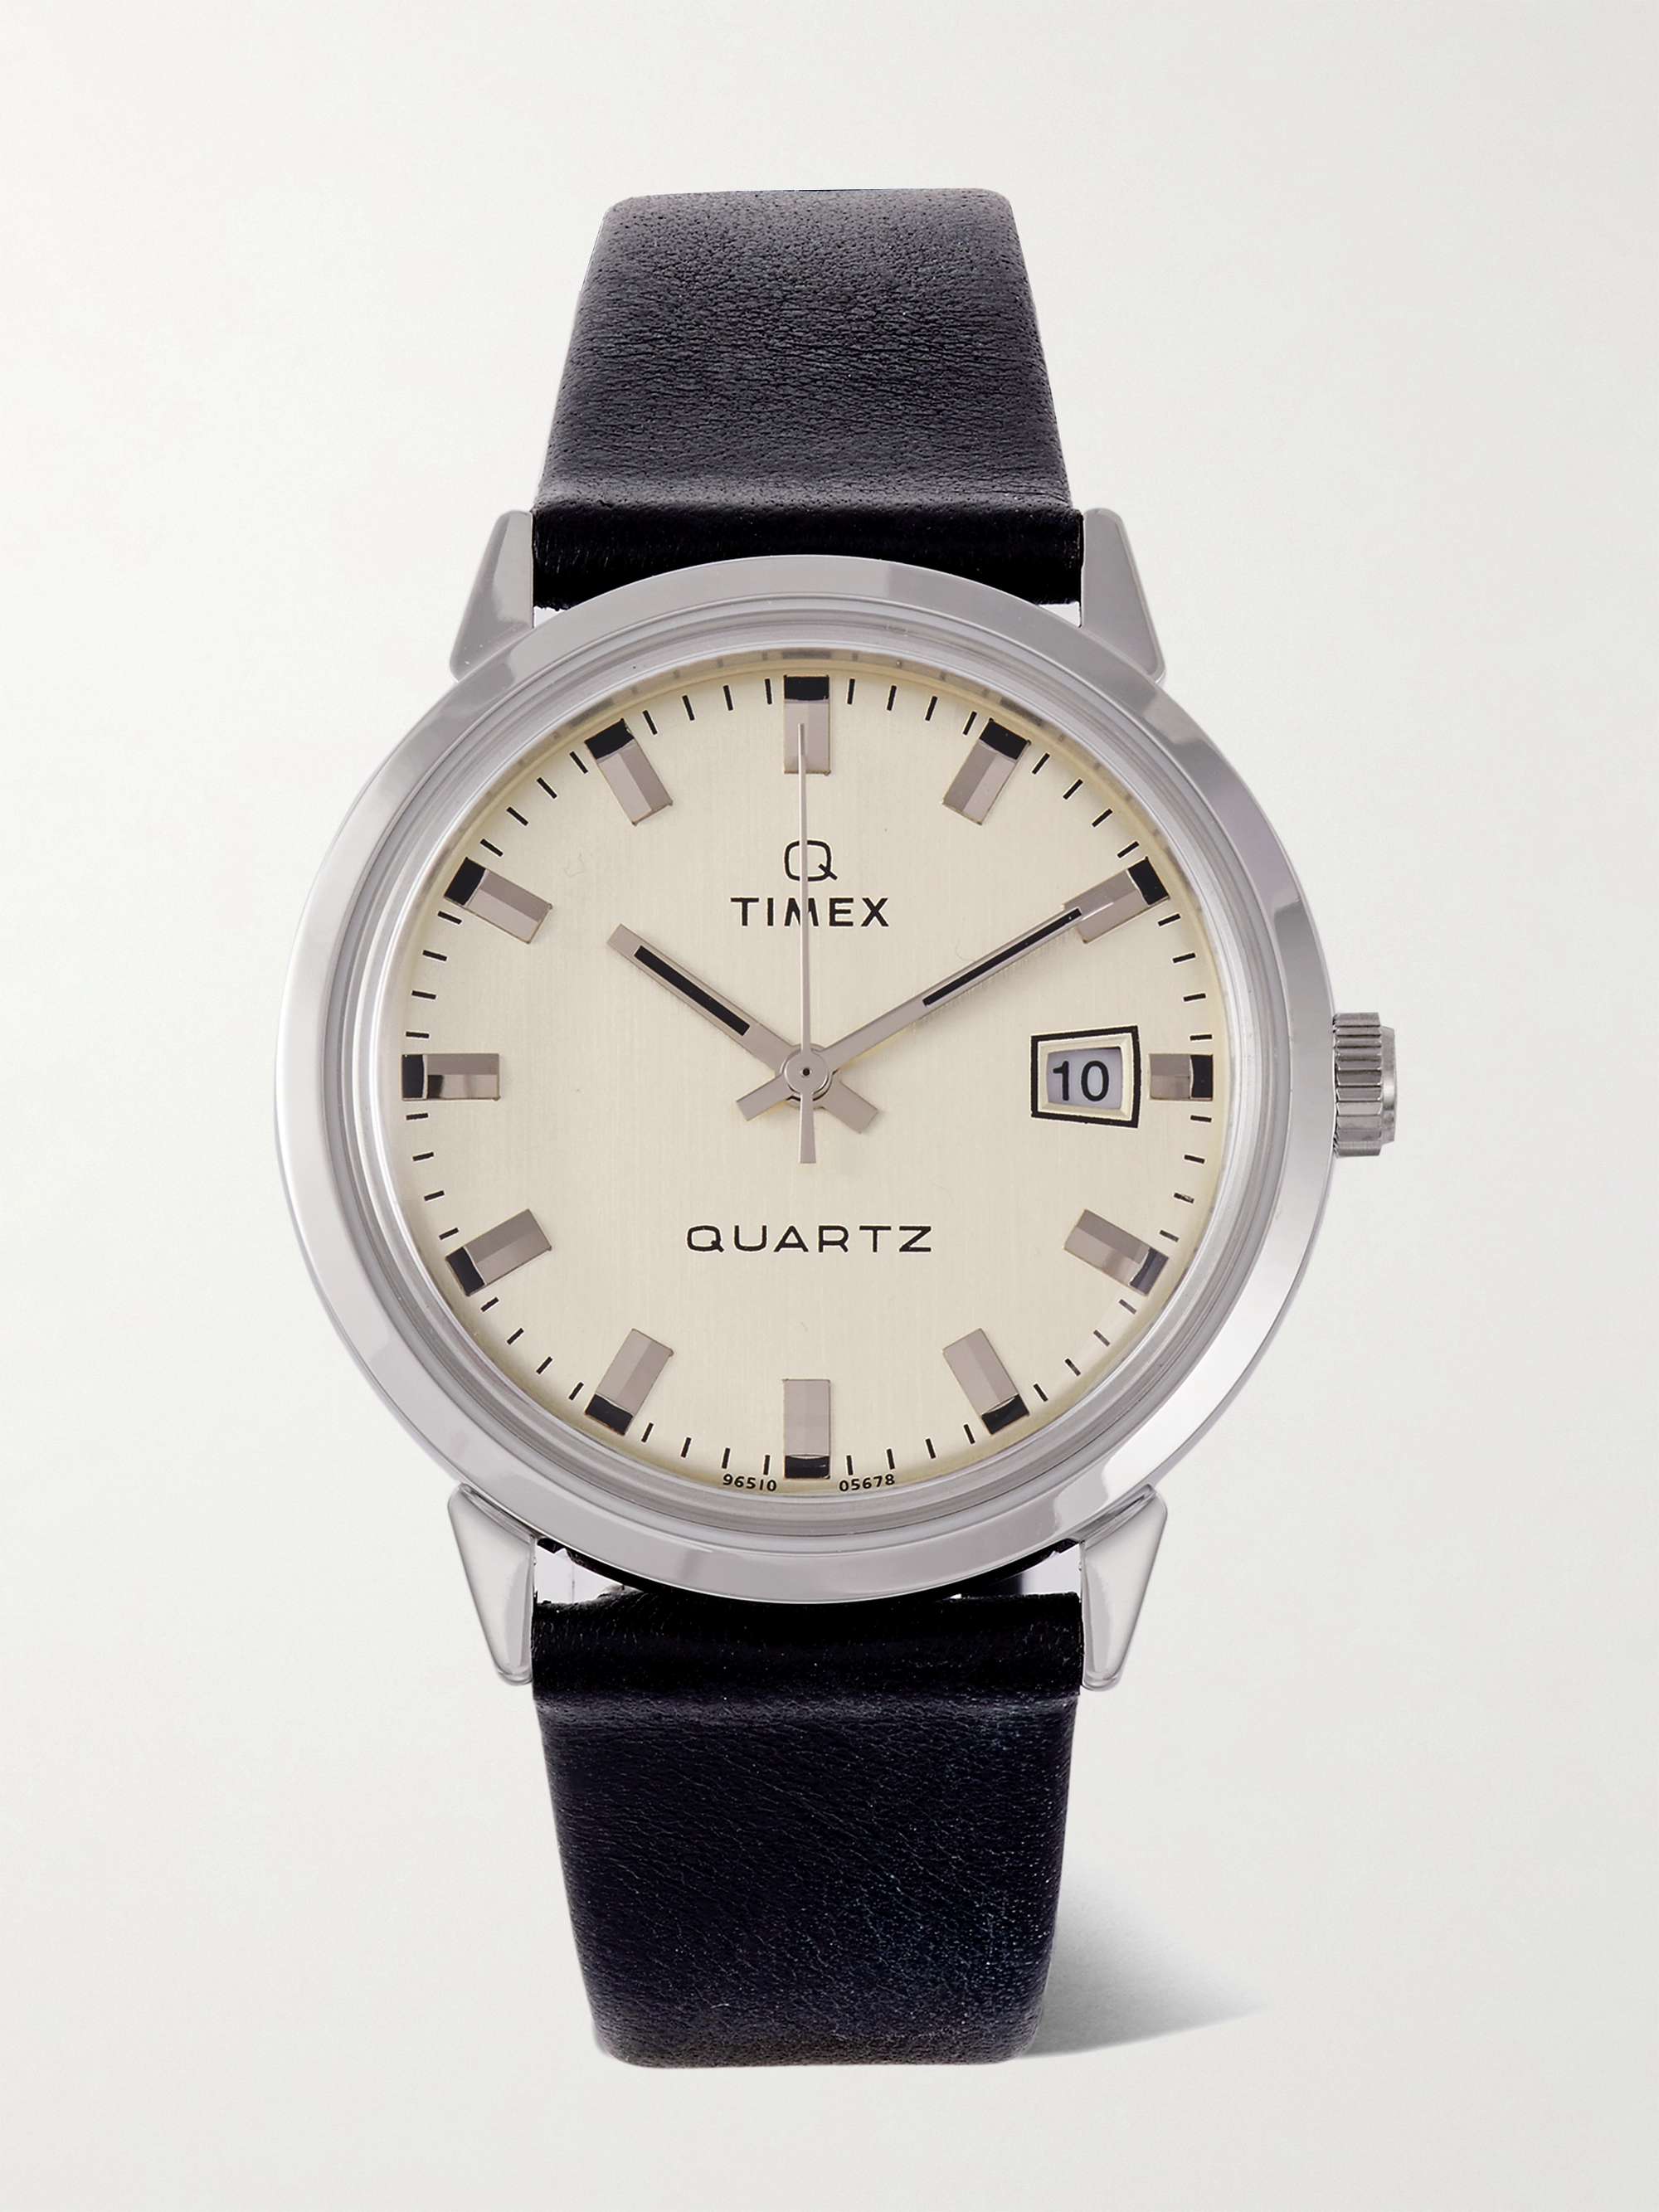 TIMEX Q Timex 1978 Reissue 35mm Stainless Steel and Leather Watch